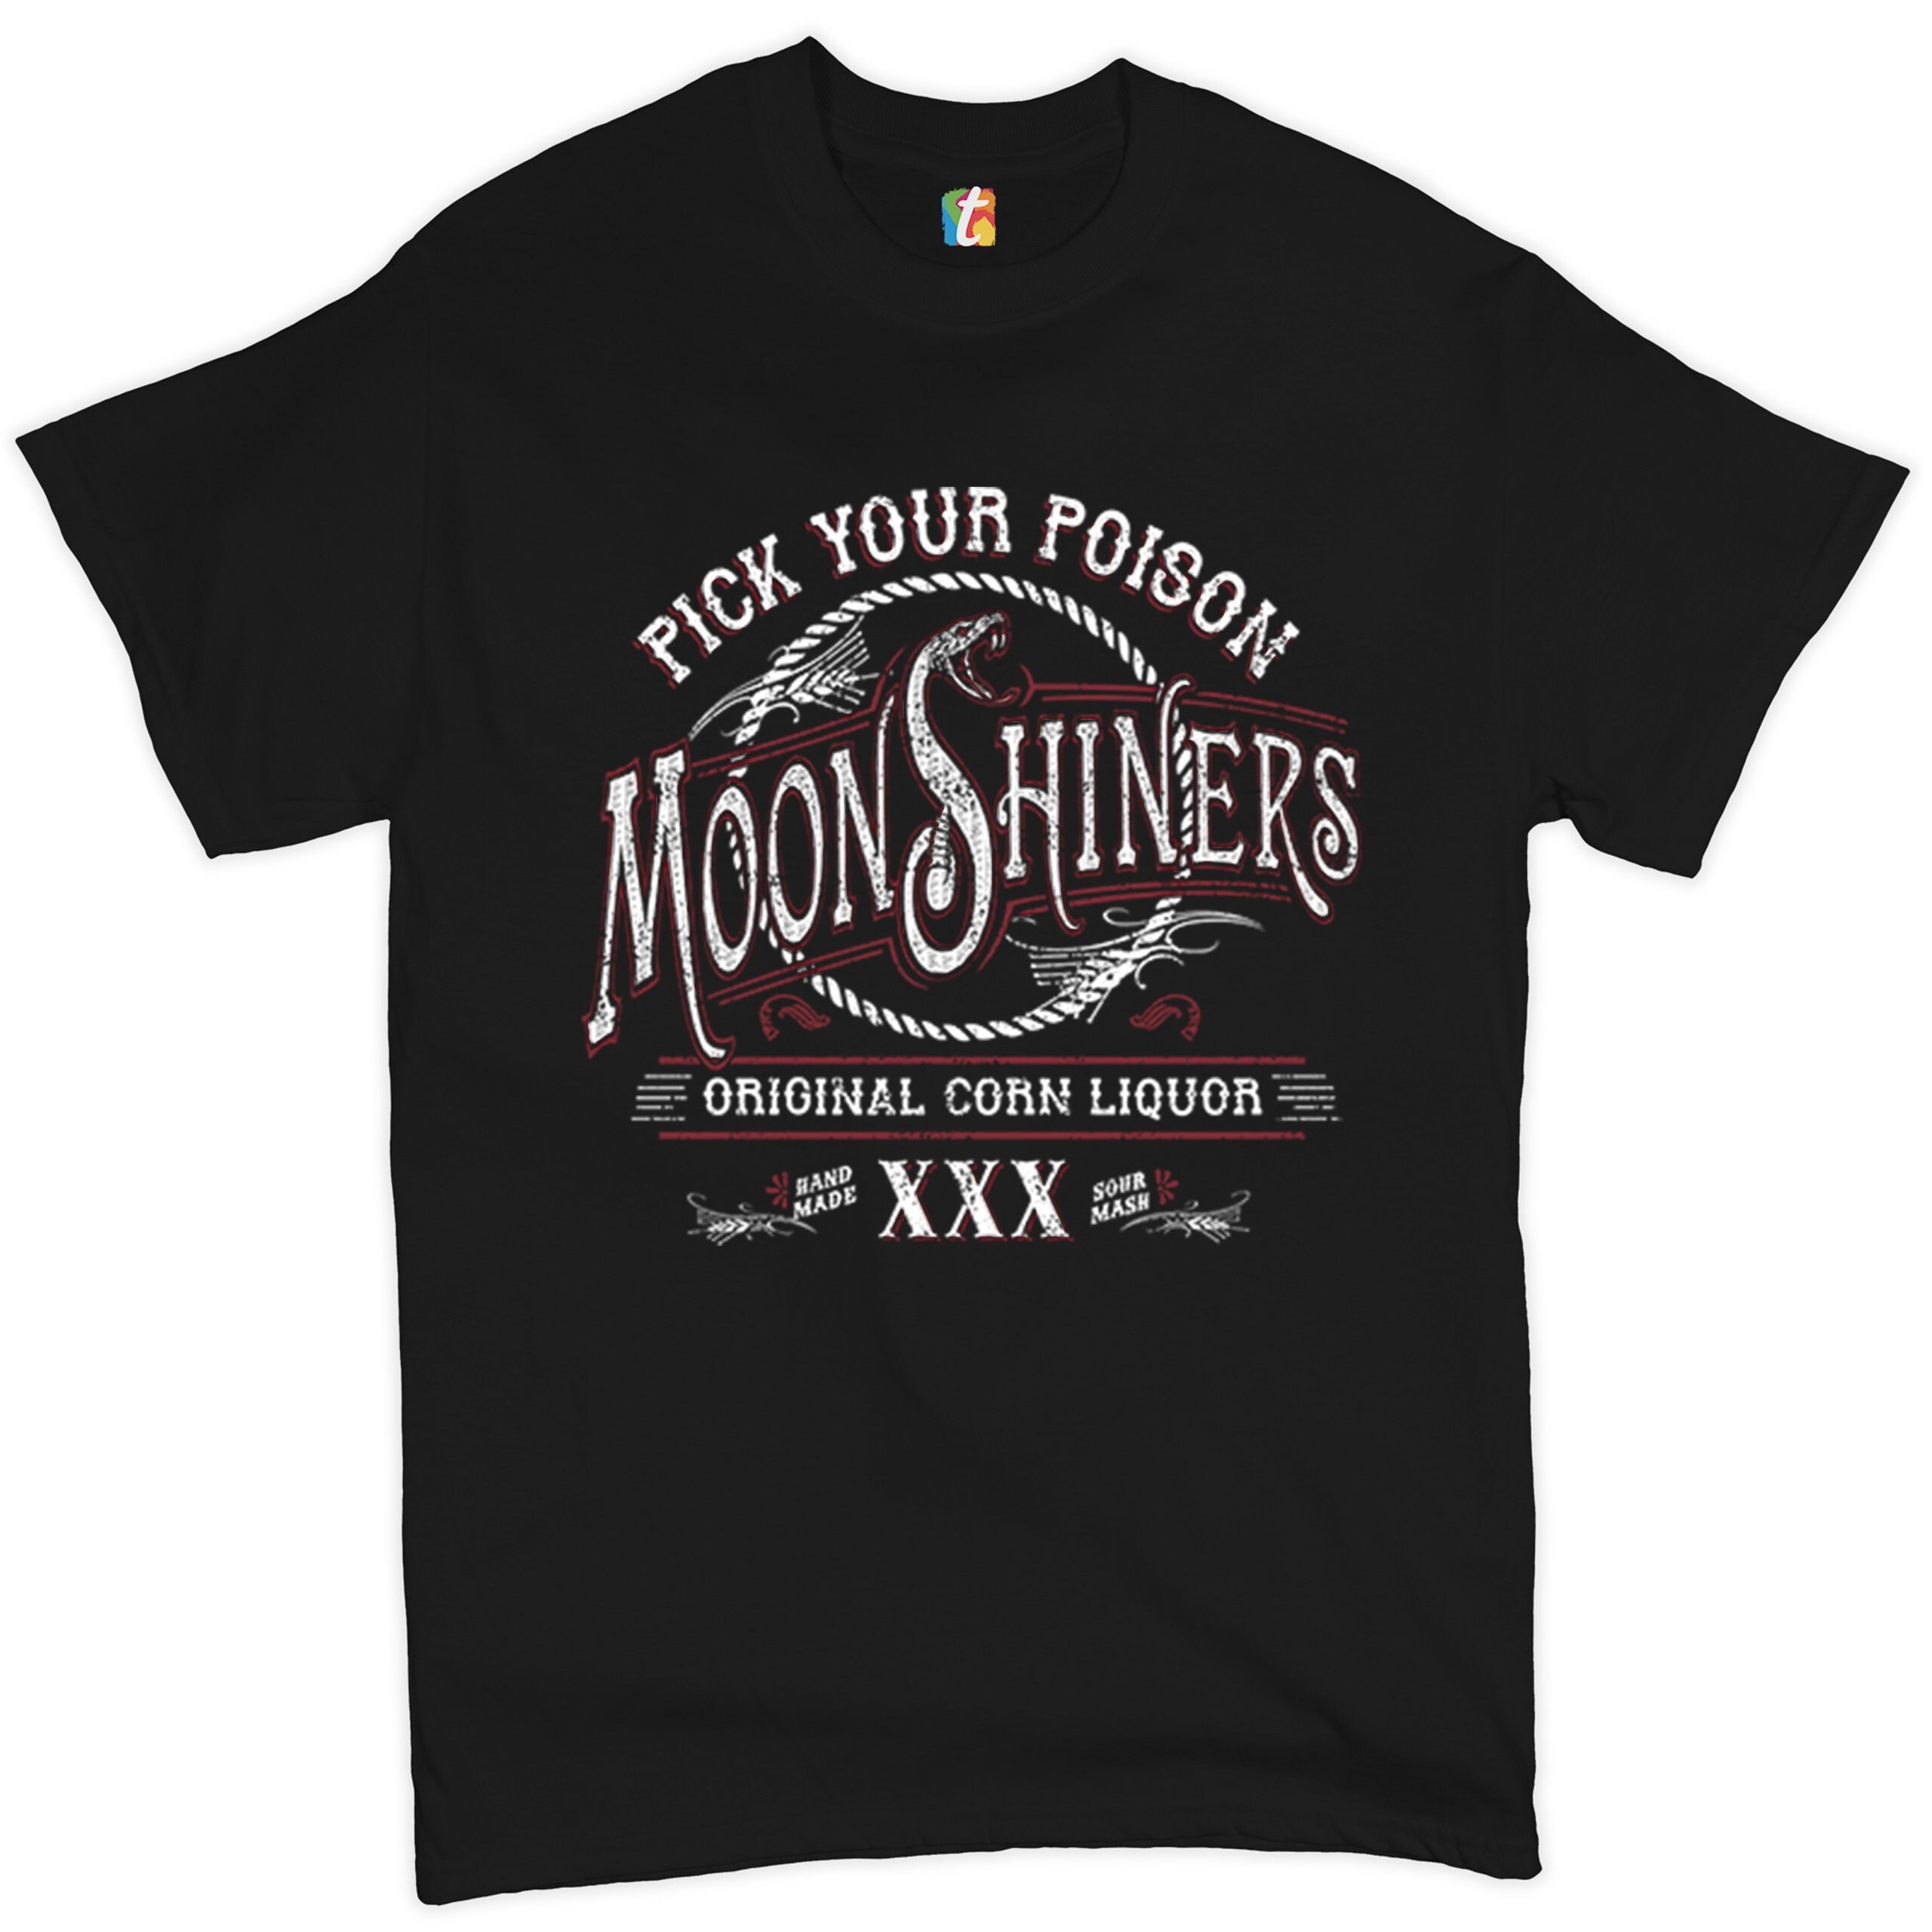 Shop Men's Graphic T-Shirts in Canada at Bootlegger